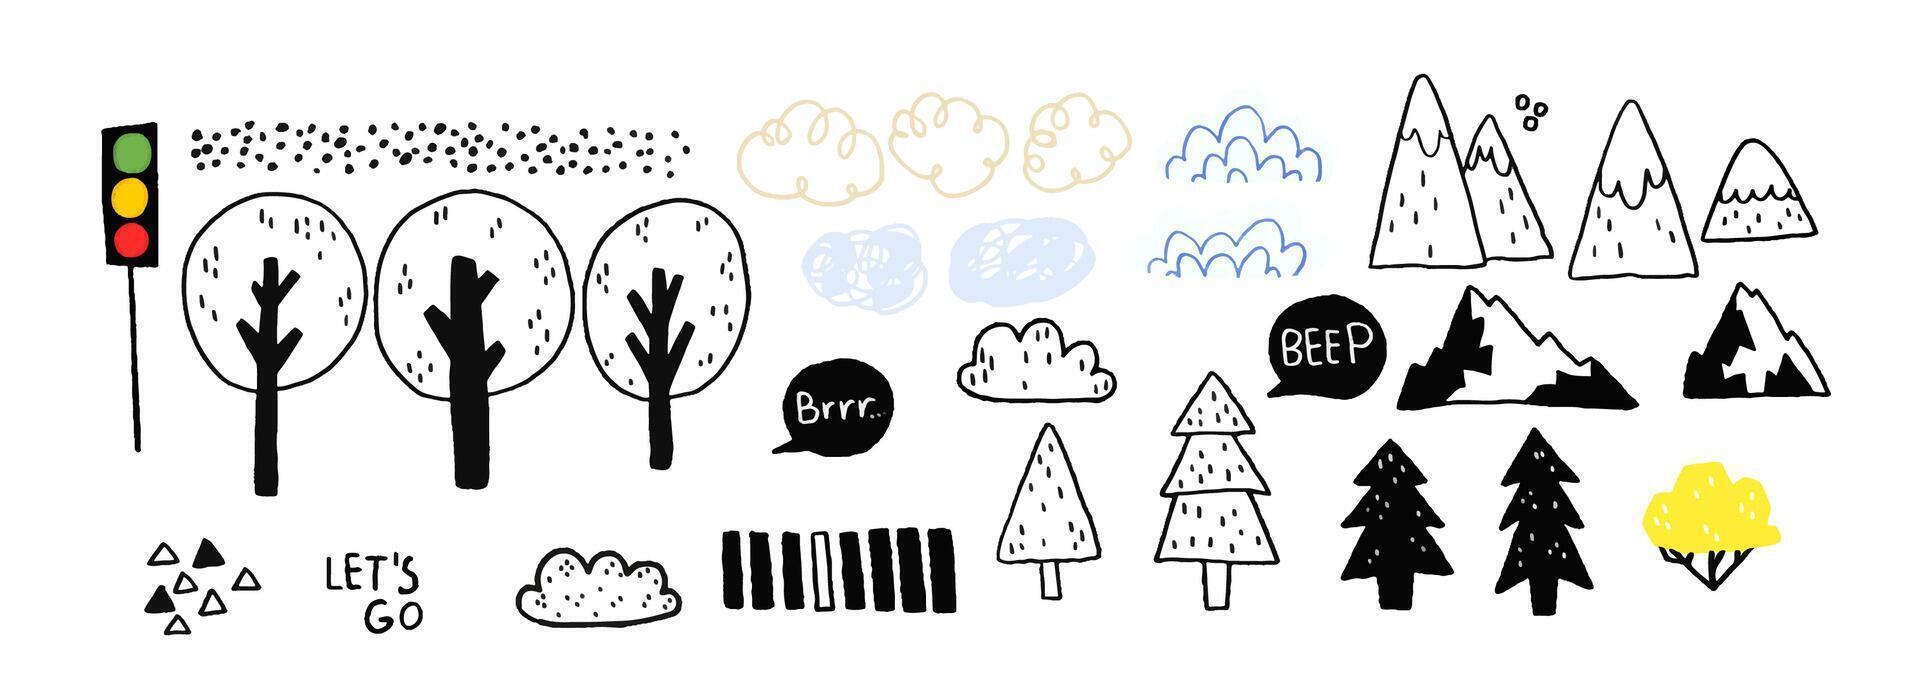 Set of nature landscape isolated elements. Isolated hand drawn i vector